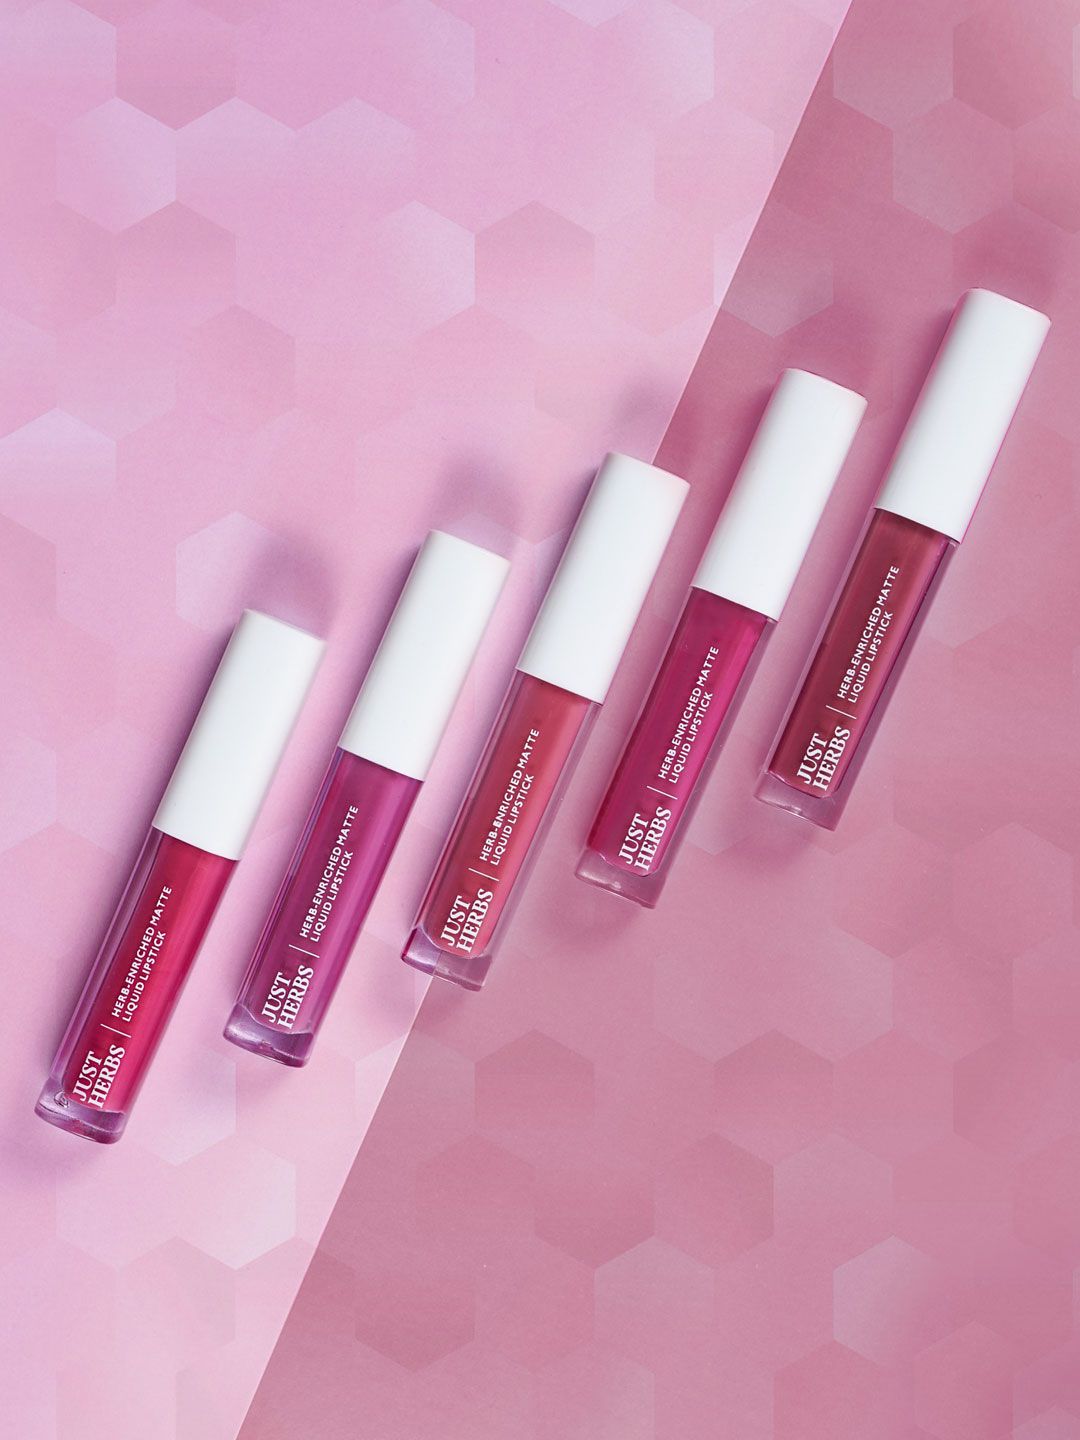 Just Herbs Set Of 5 Matte Liquid Lipstick With Sweet Almond Oil 10ml Price in India